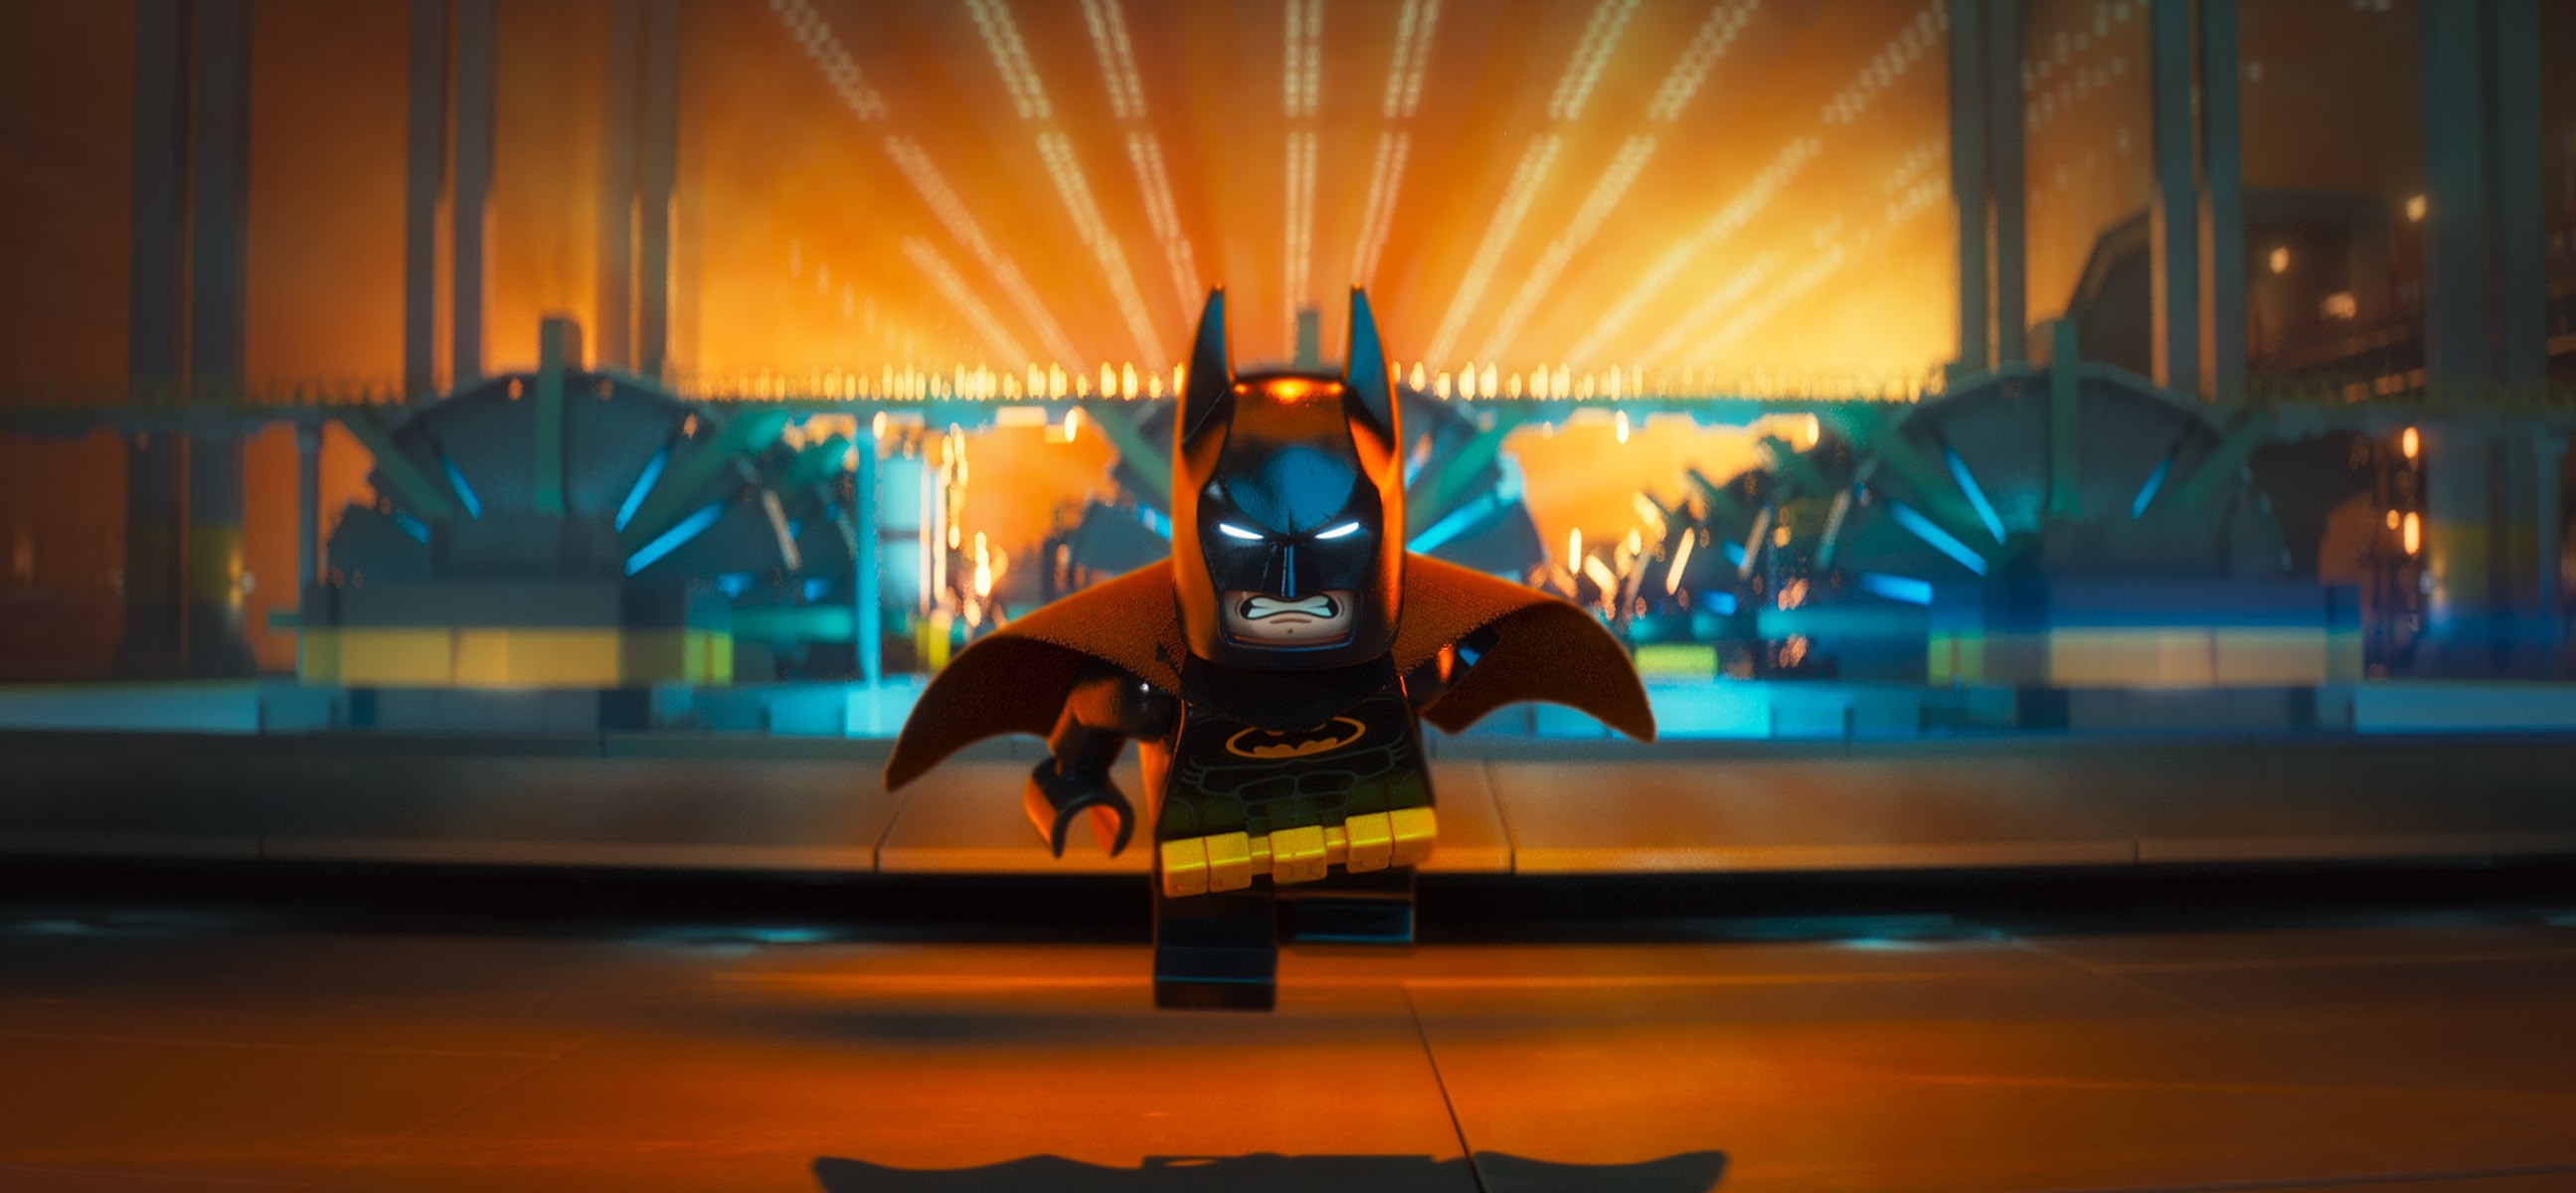 bliver nervøs Anonym Hearty The Lego Batman Movie: Trailer 4 - Trailers & Videos - Rotten Tomatoes